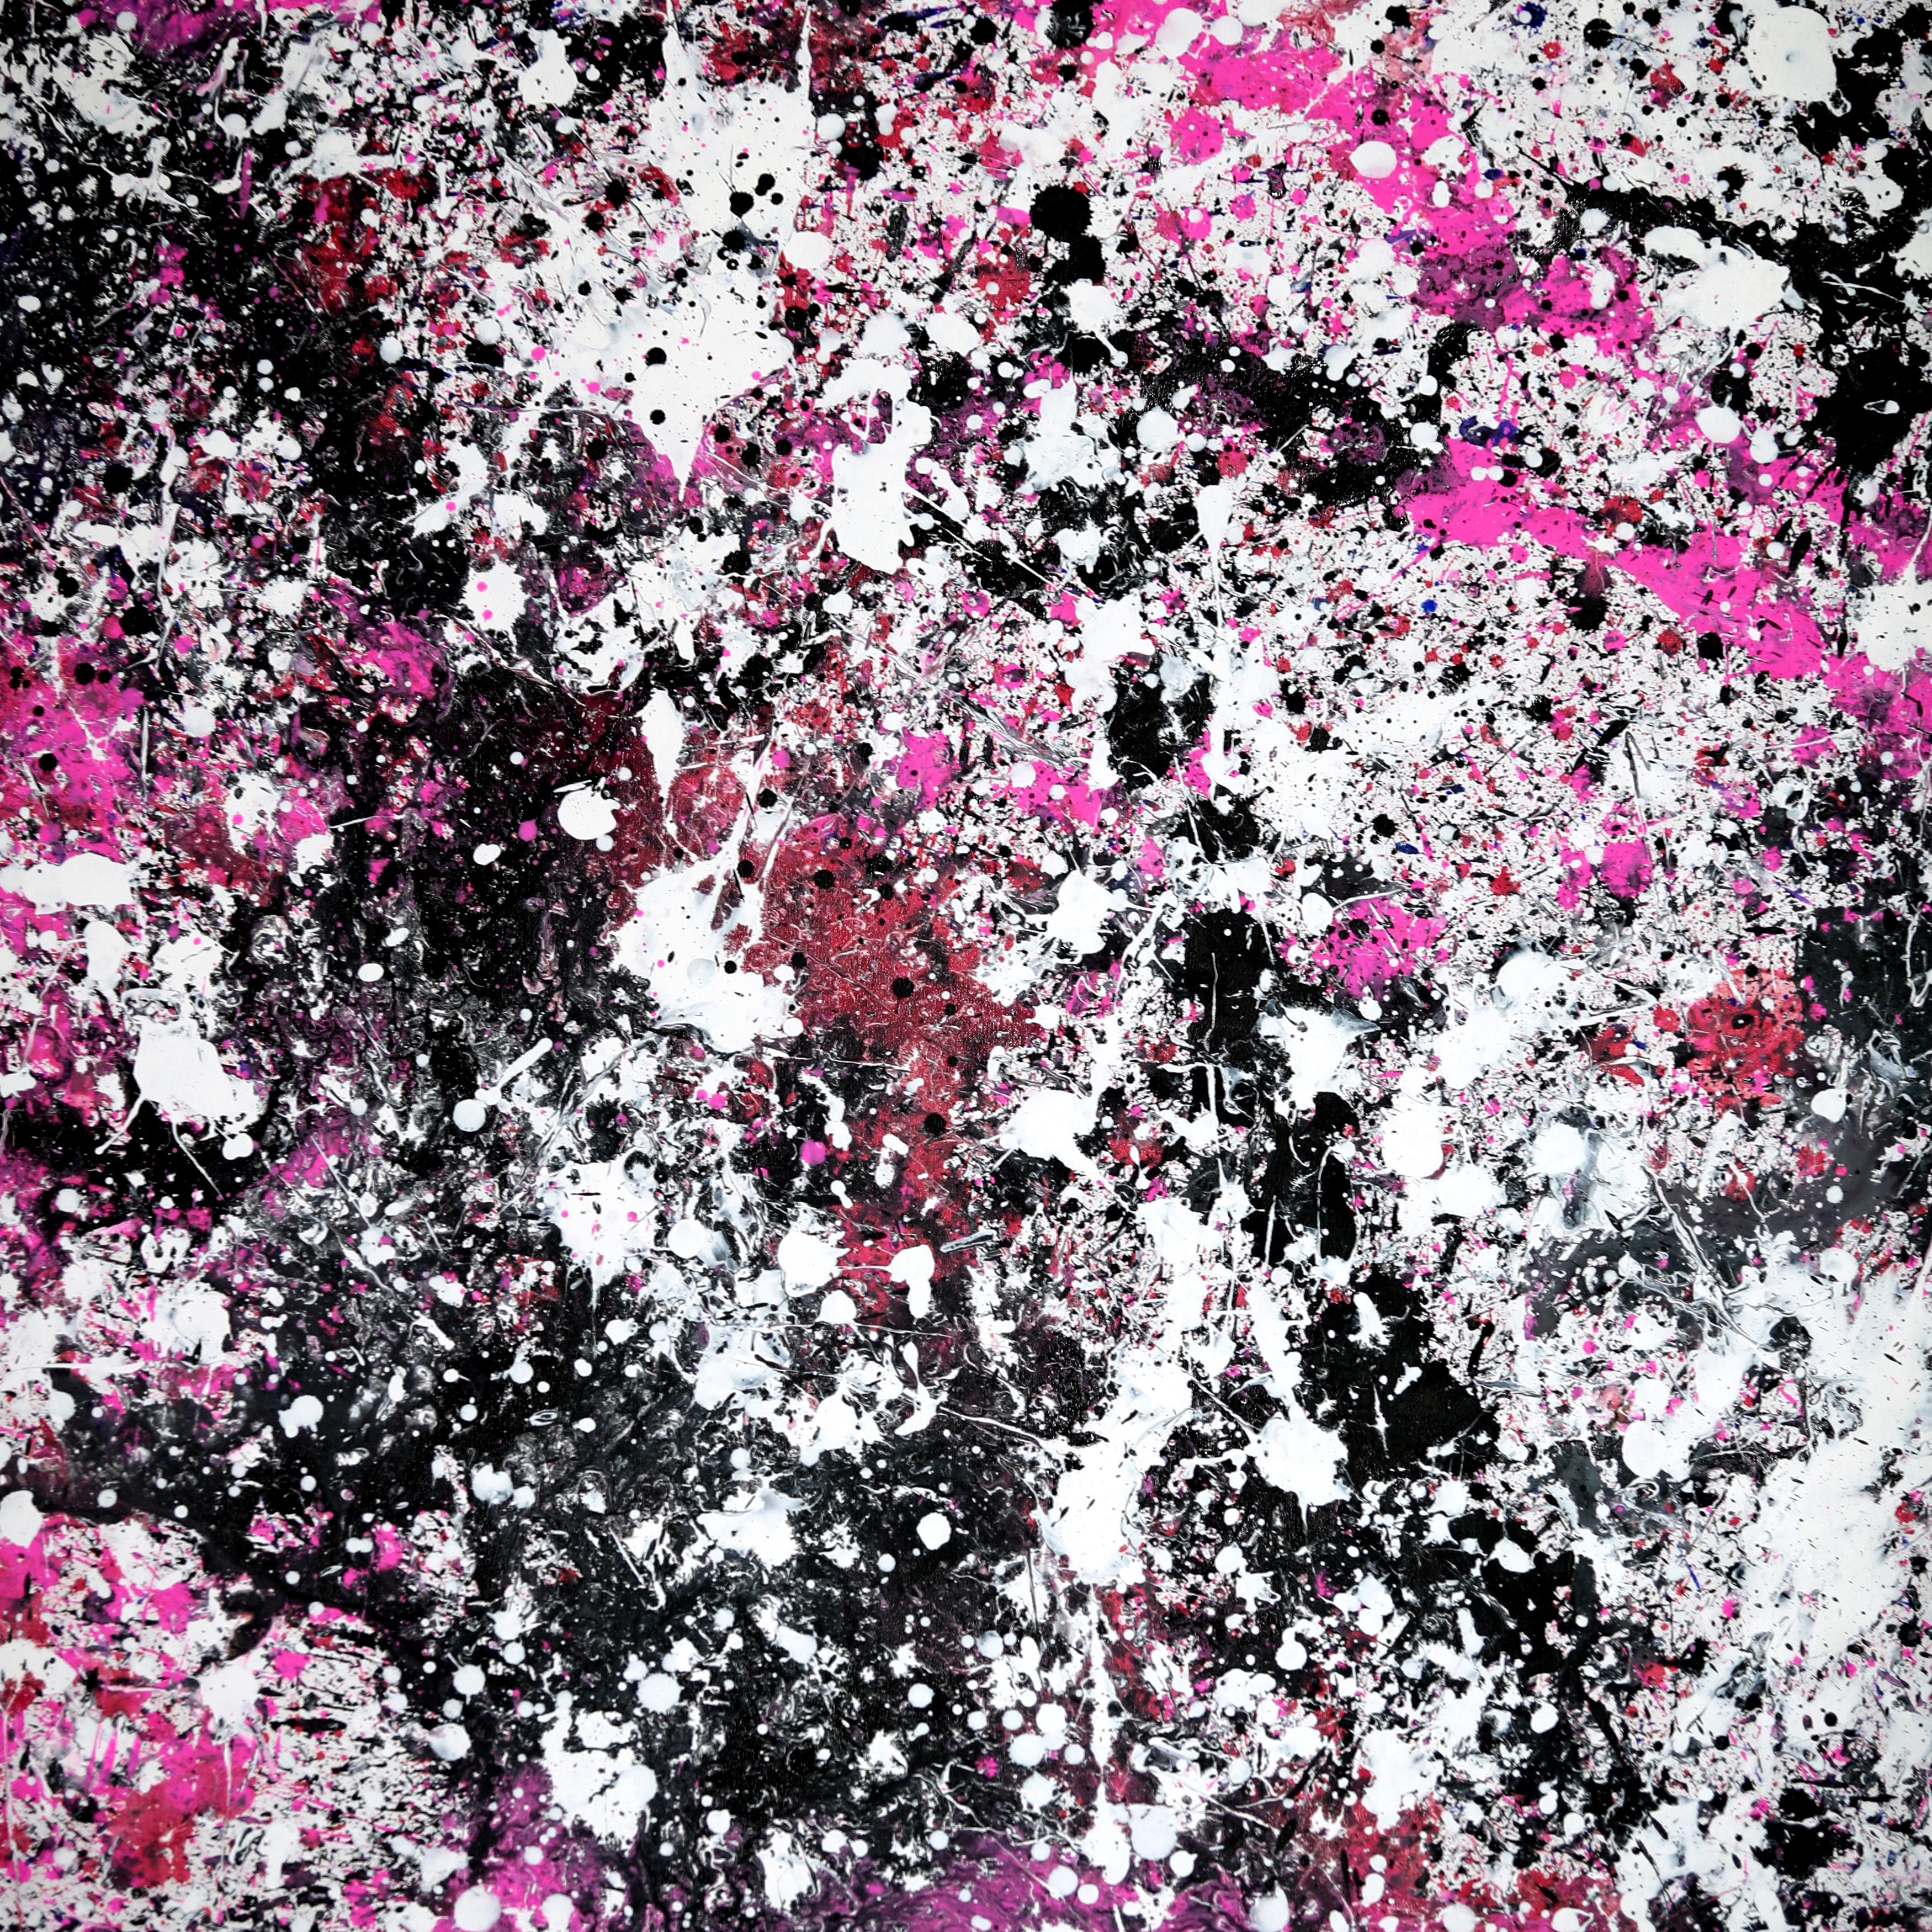 My Pink Universe - Gray Abstract Painting by Estelle Asmodelle